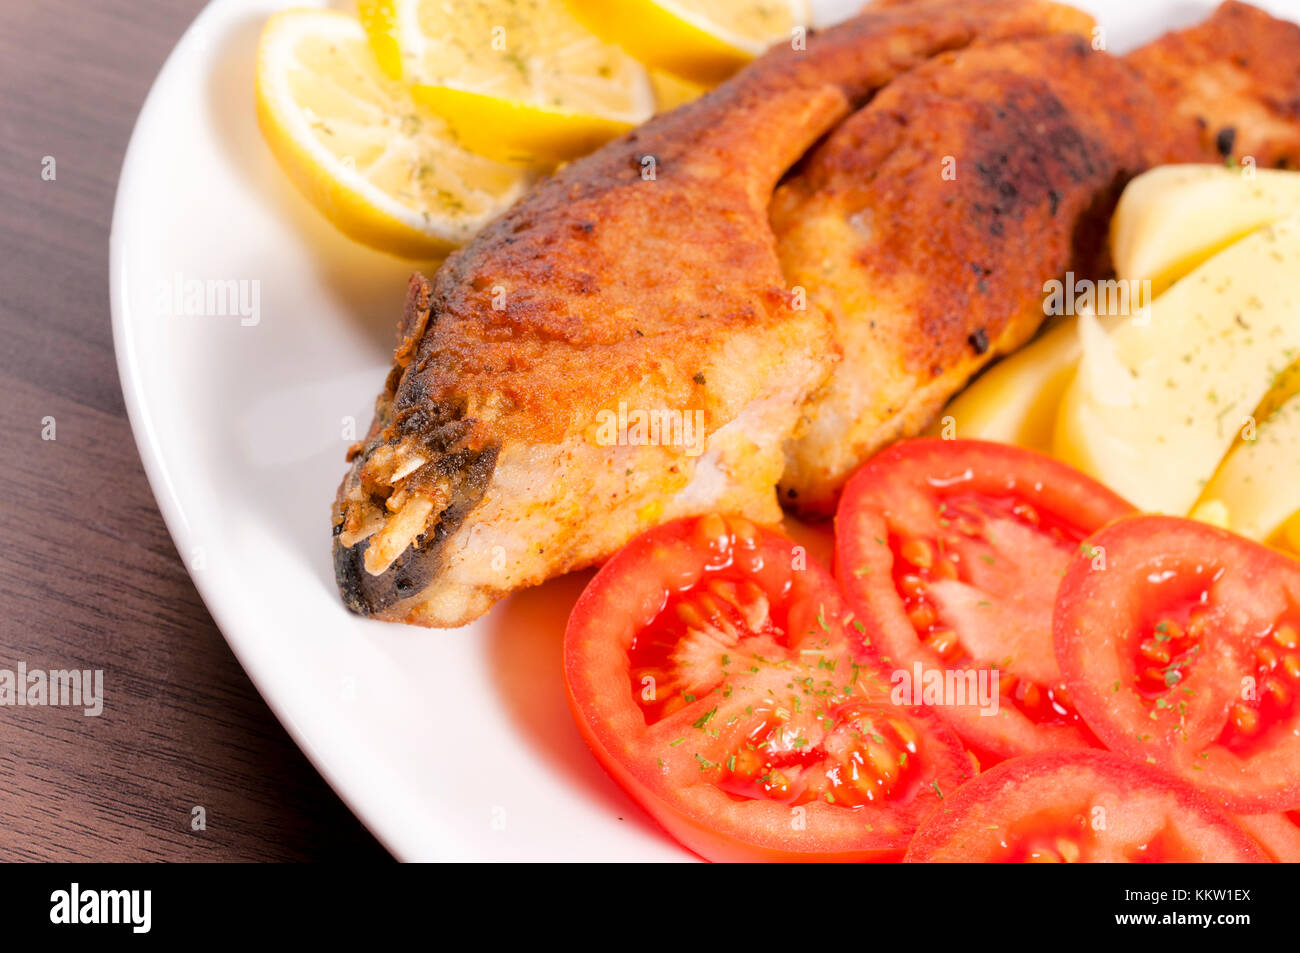 Selective focus on the carp fillet Stock Photo